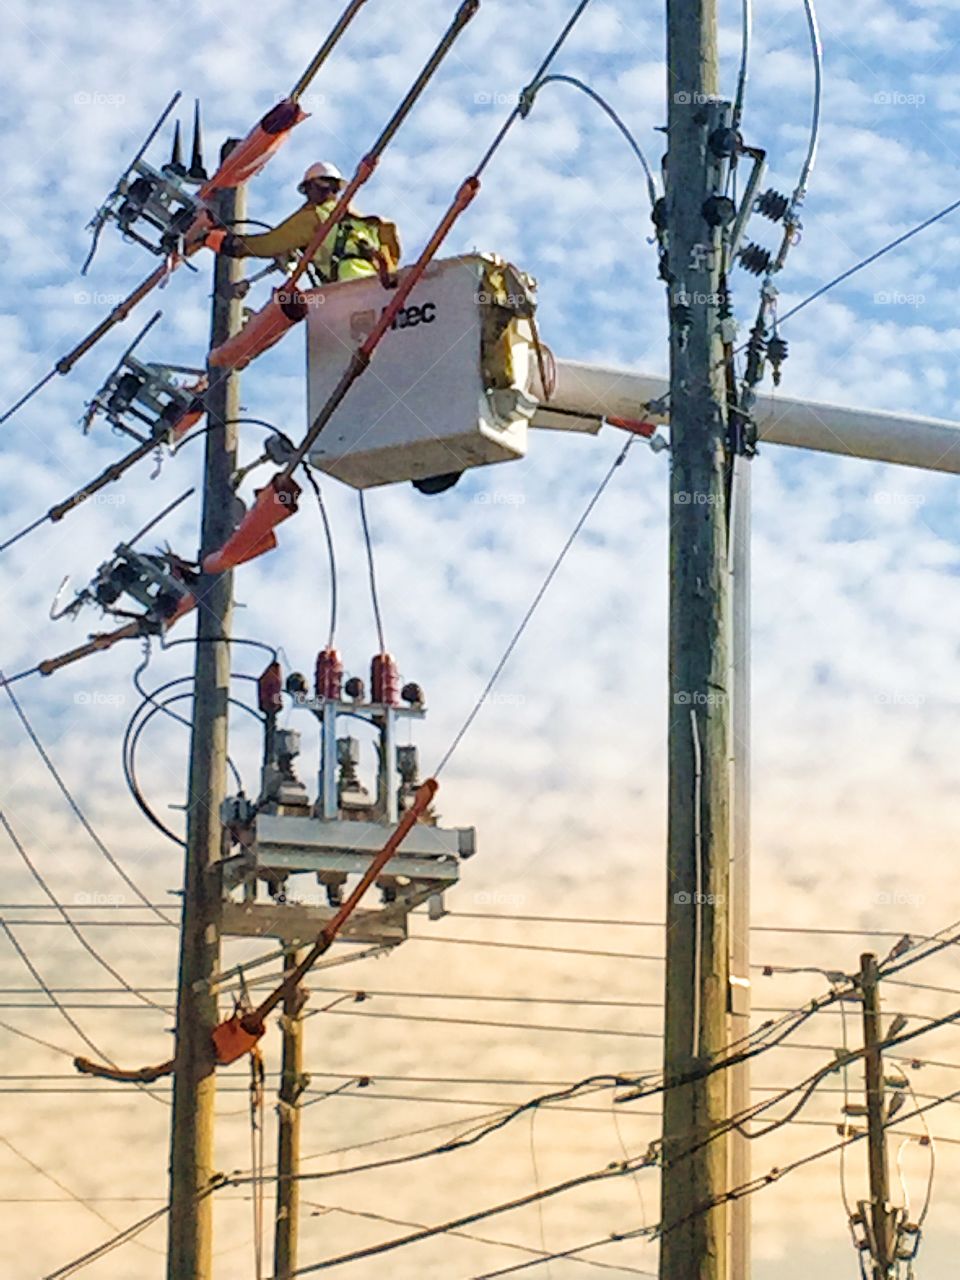 Lineman for an electric company working on power lines from a cherry picker.